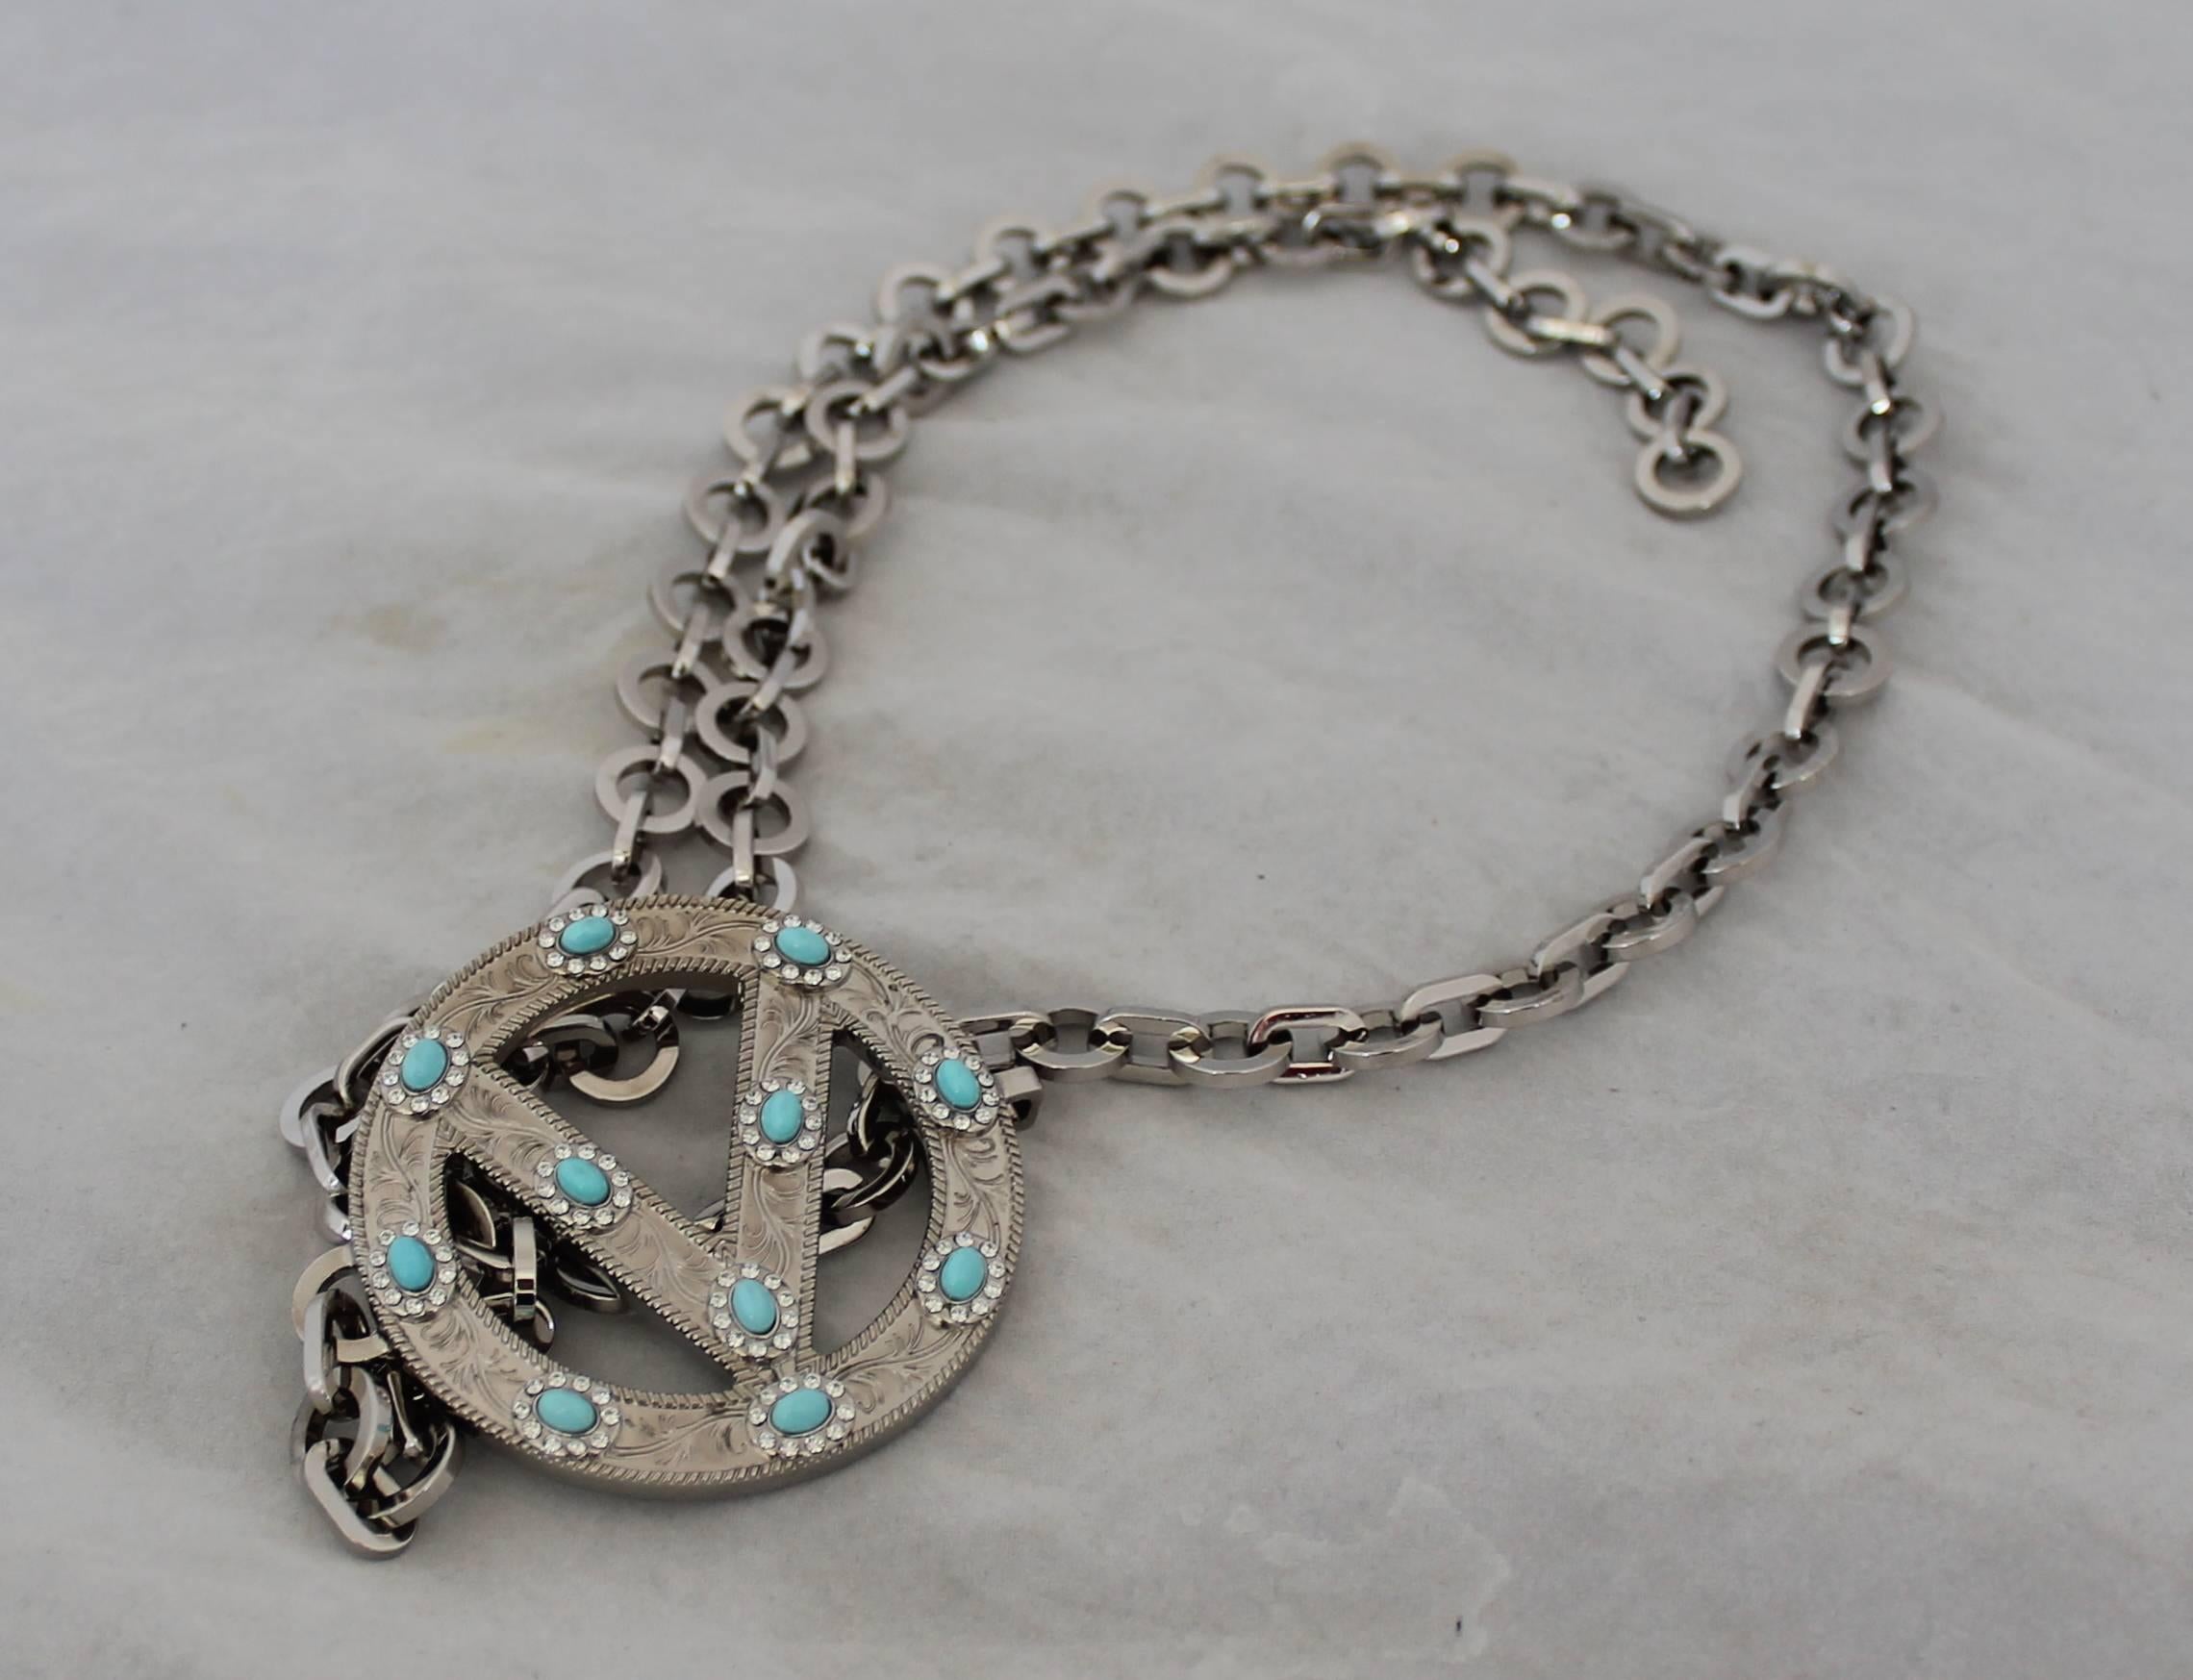 Valentino Thin Silver Single Chain Belt w/ Logo Buckle This belt is in excellent condition. It has an etched design w/ turquoise and rhinestones.

Measurements:
Buckle:
Length: 2.5